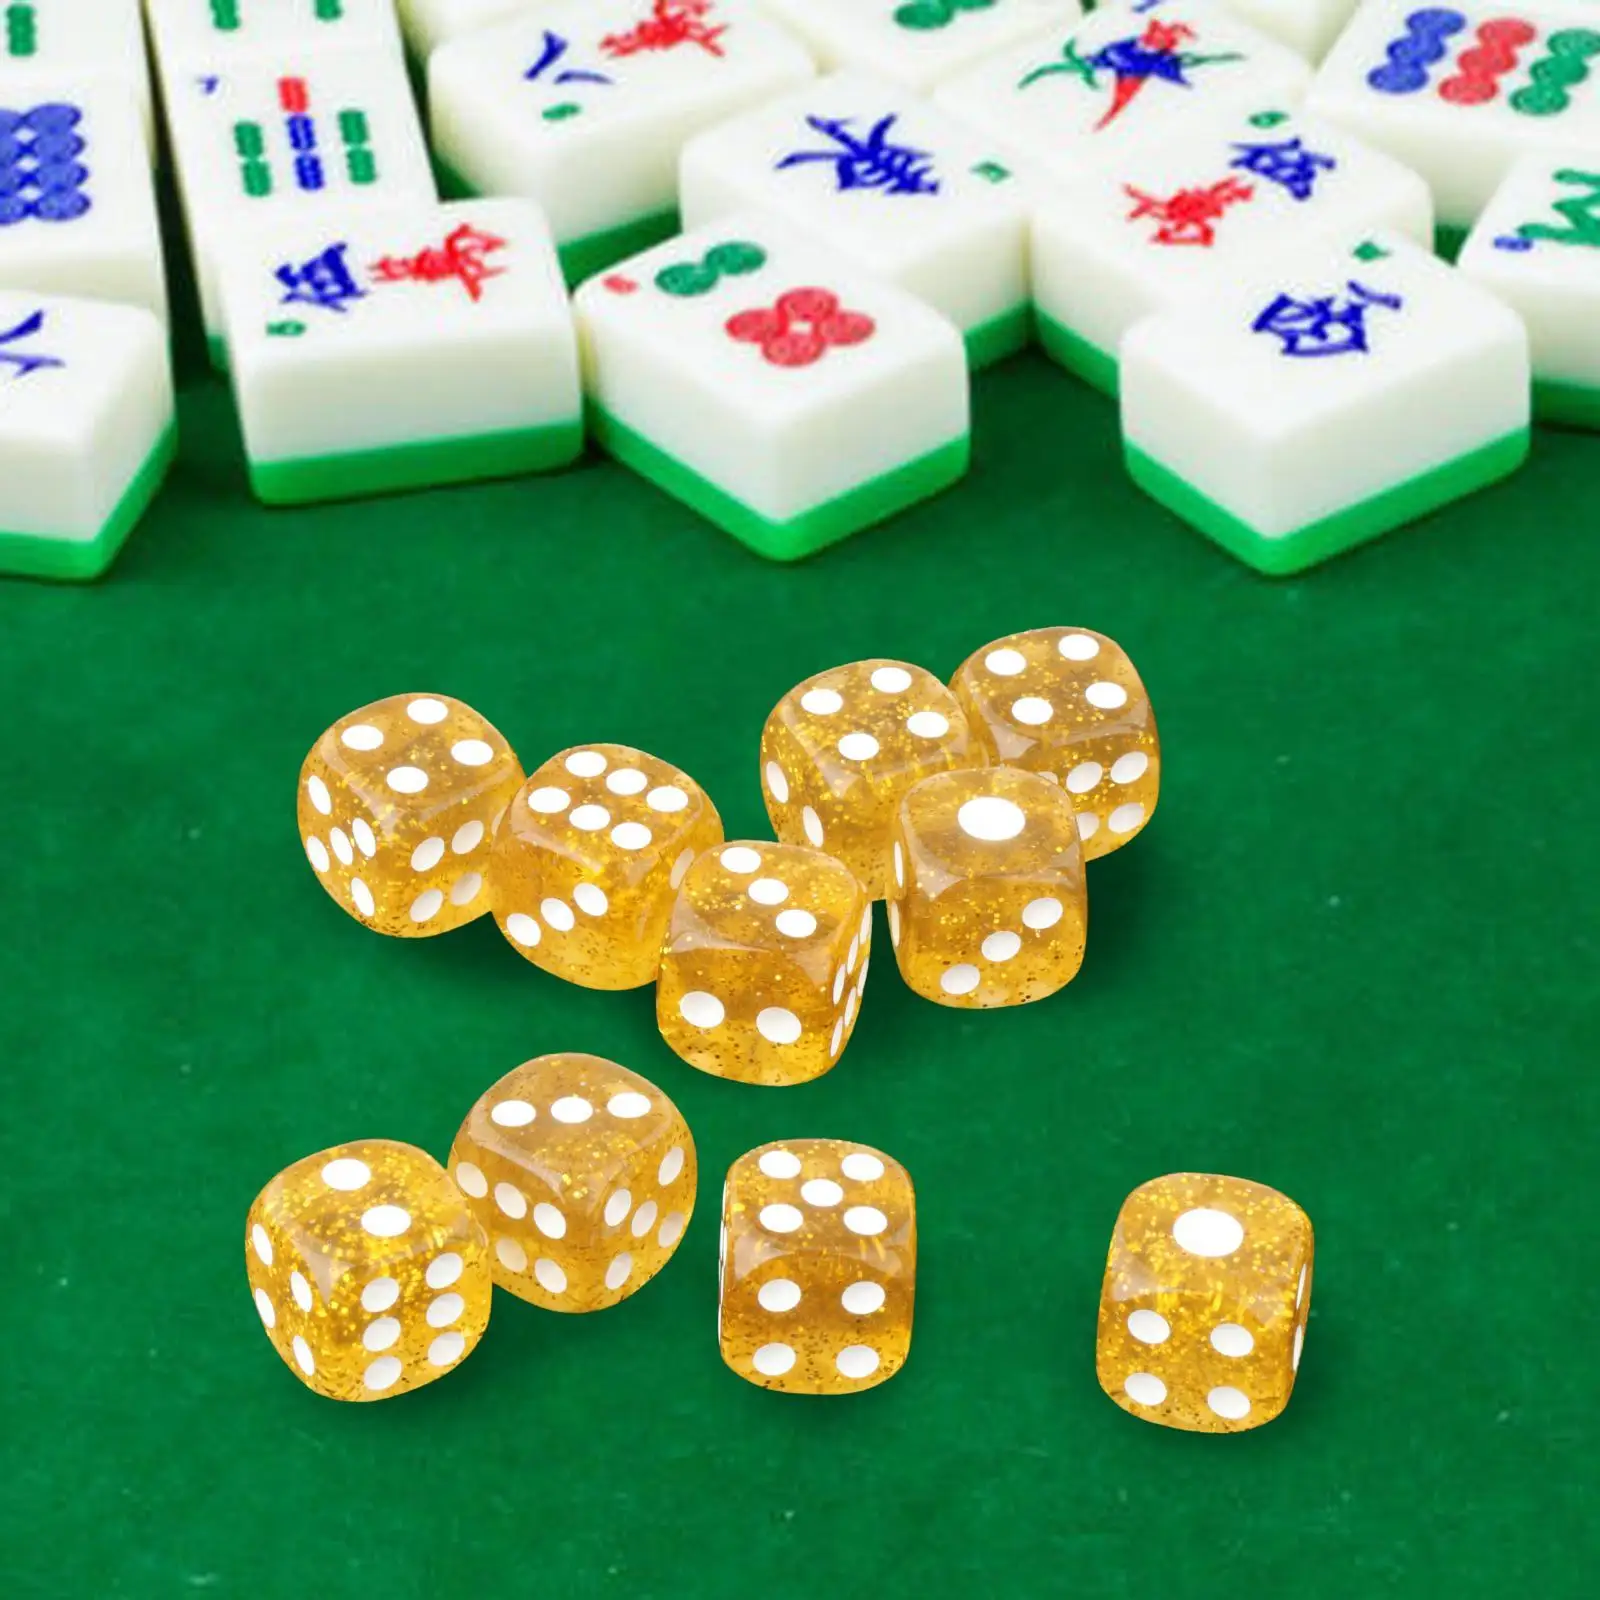 10 Pieces 6 Sided Acrylic Dices Dice Game Spot Dice for Party Table Board 